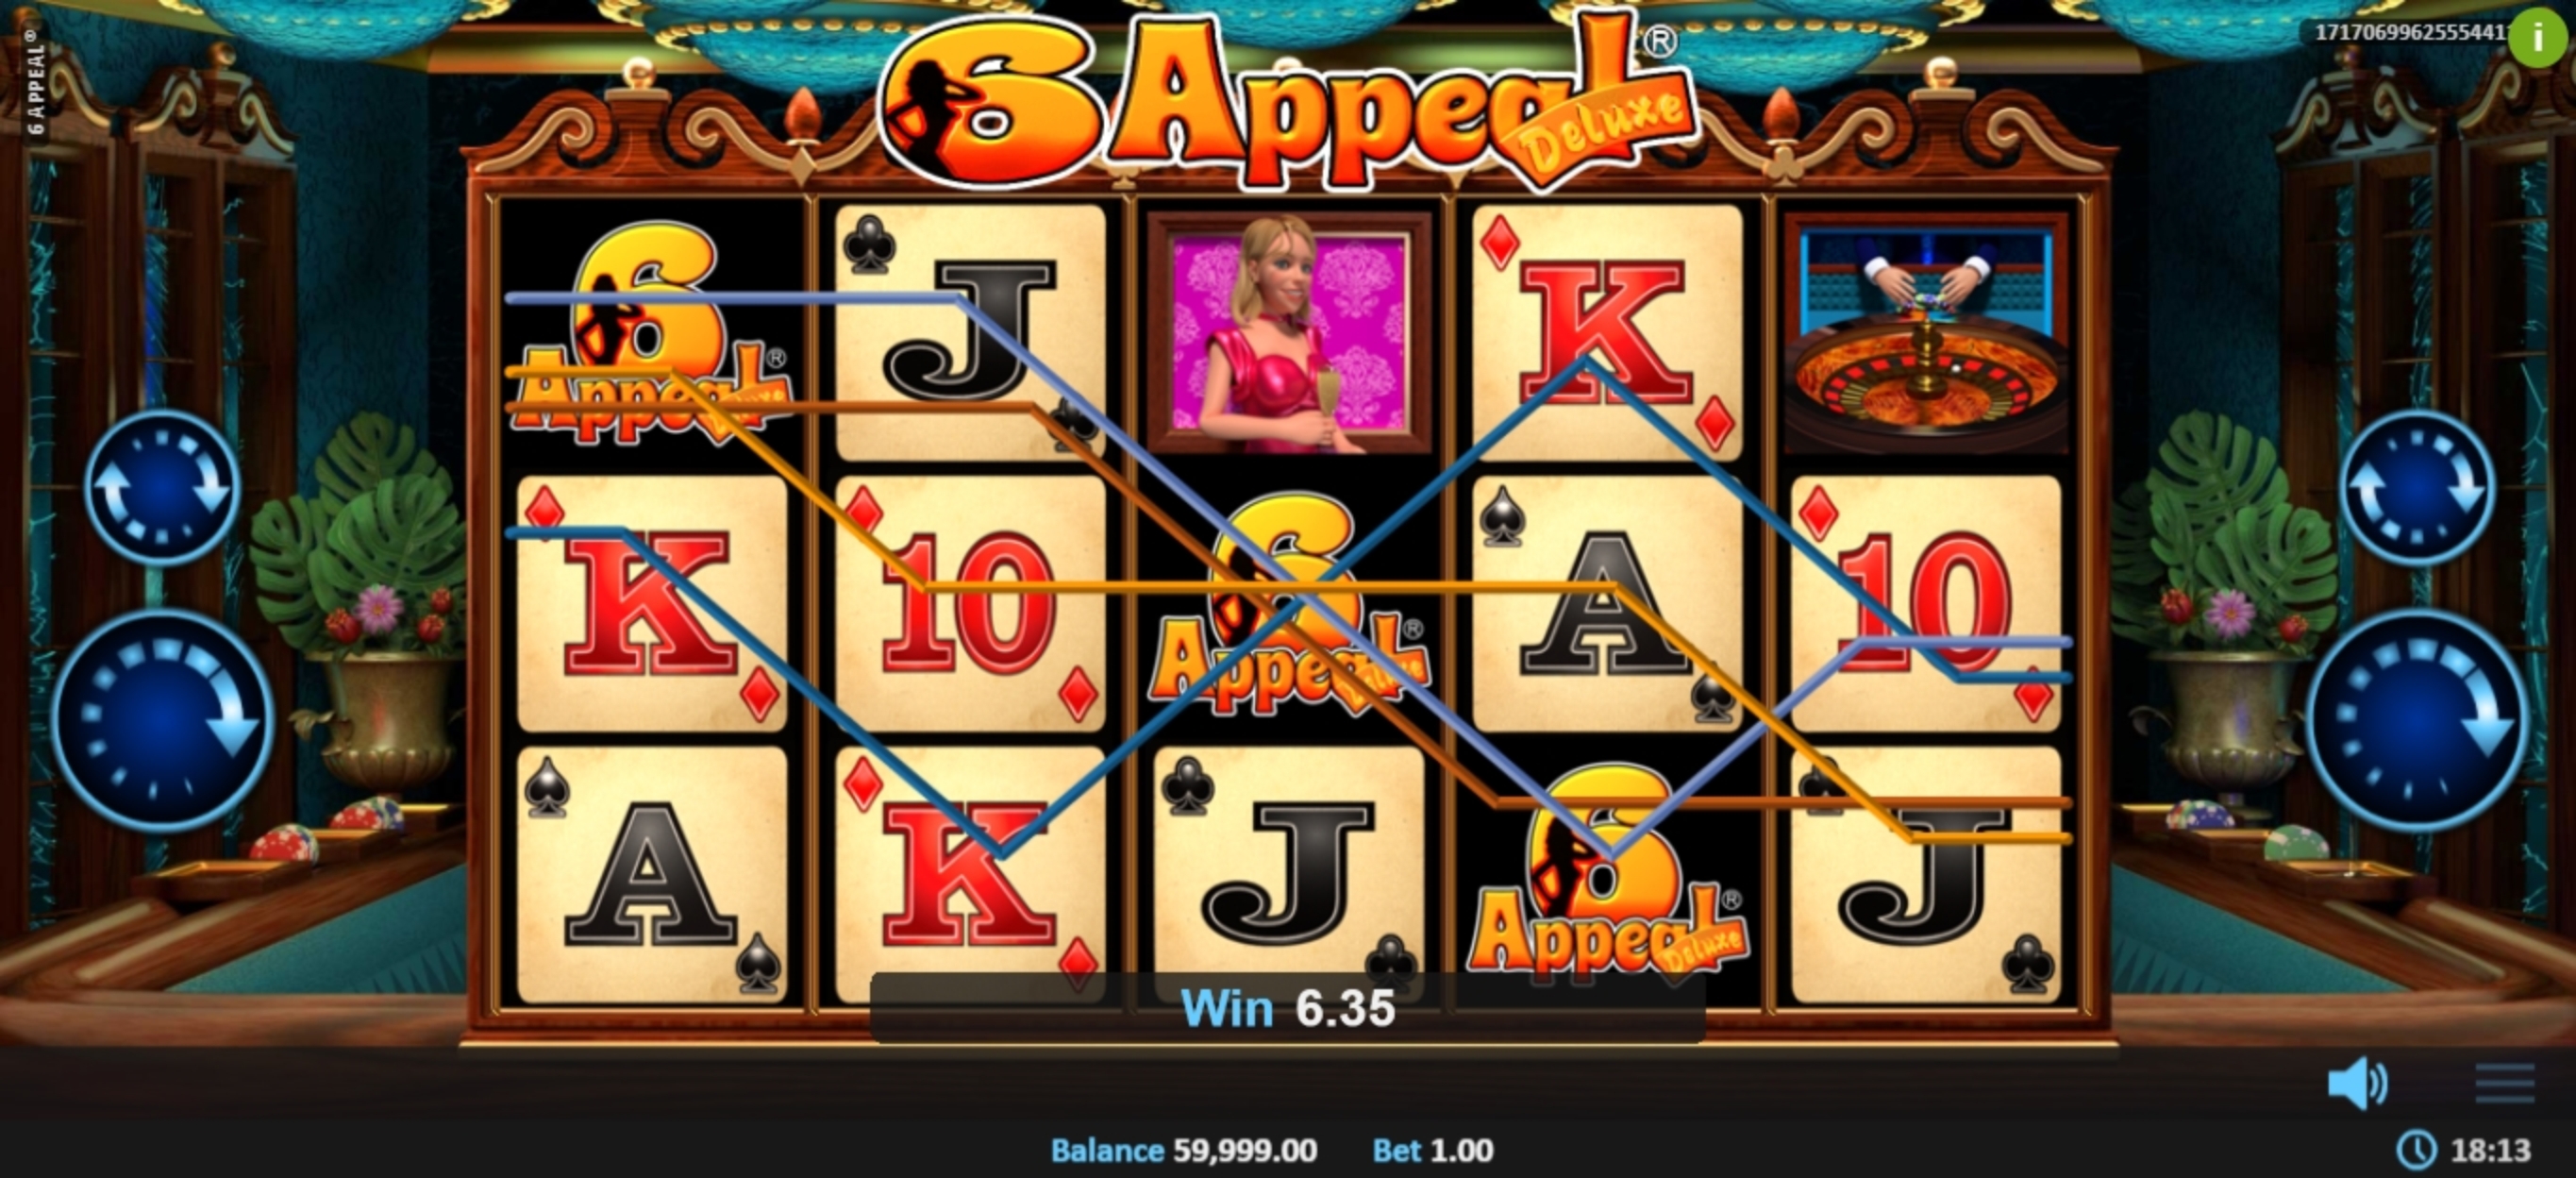 Win Money in 6 Appeal Deluxe Free Slot Game by Realistic Games